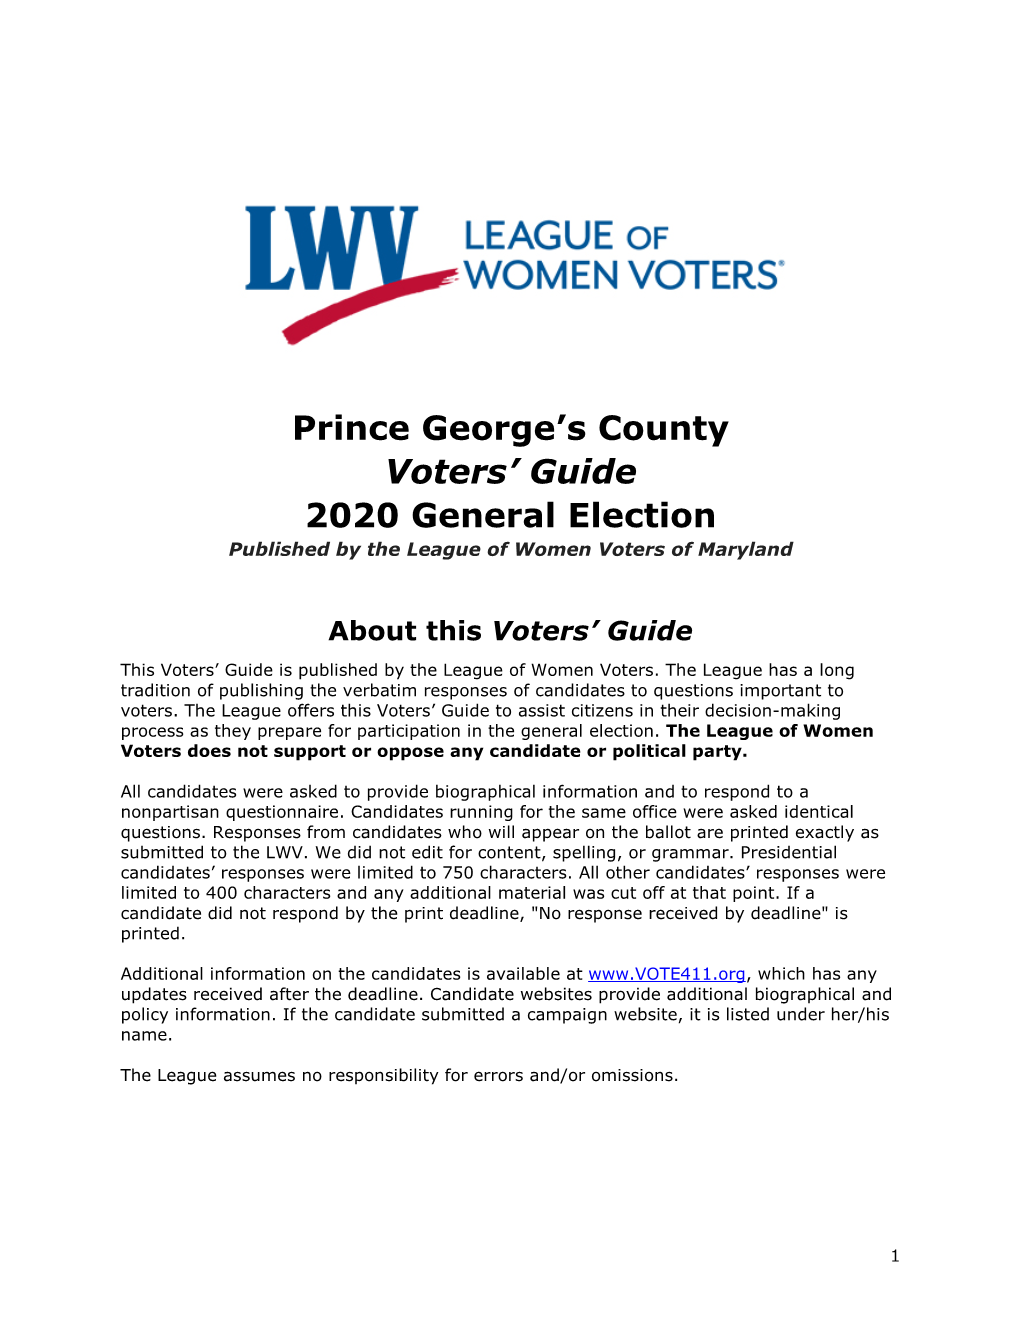 Prince George's County Voters' Guide 2020 Election